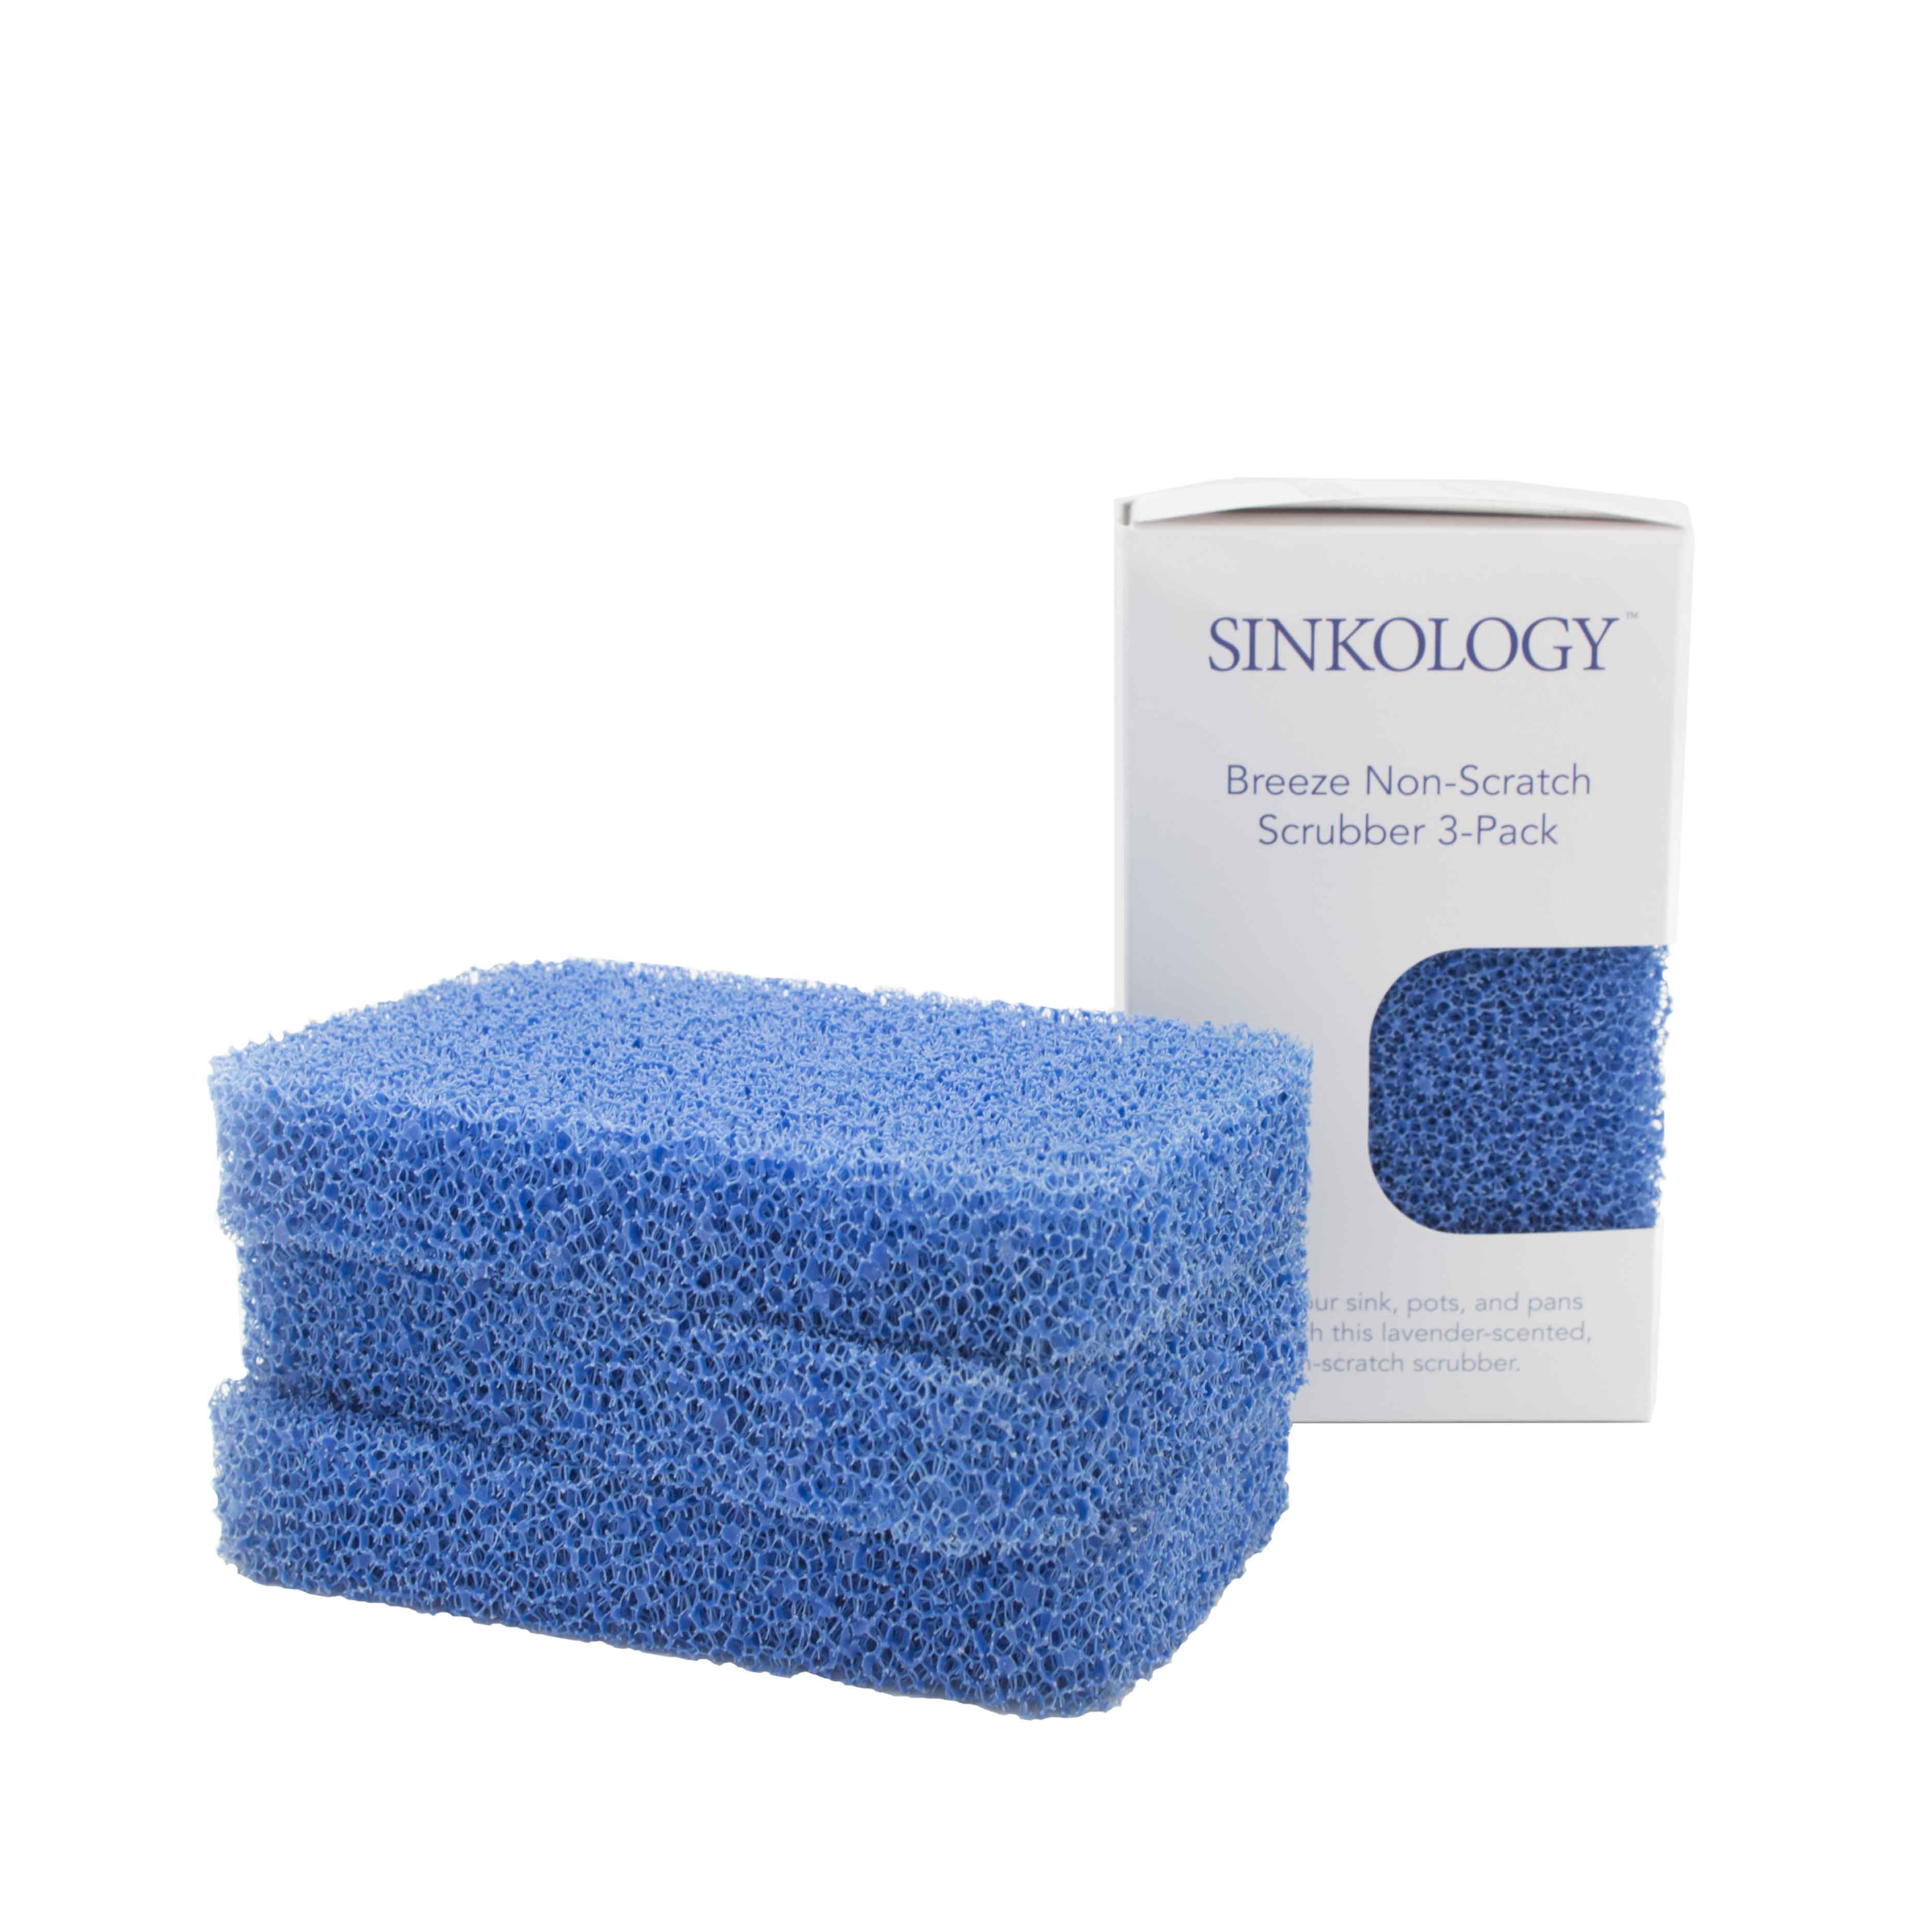 Sinkology SSCRUB-101-3 Breeze Non-Scratch and Odor Resistant Silicone Scrubber Package of 3 Sponges Blue 3 Piece 